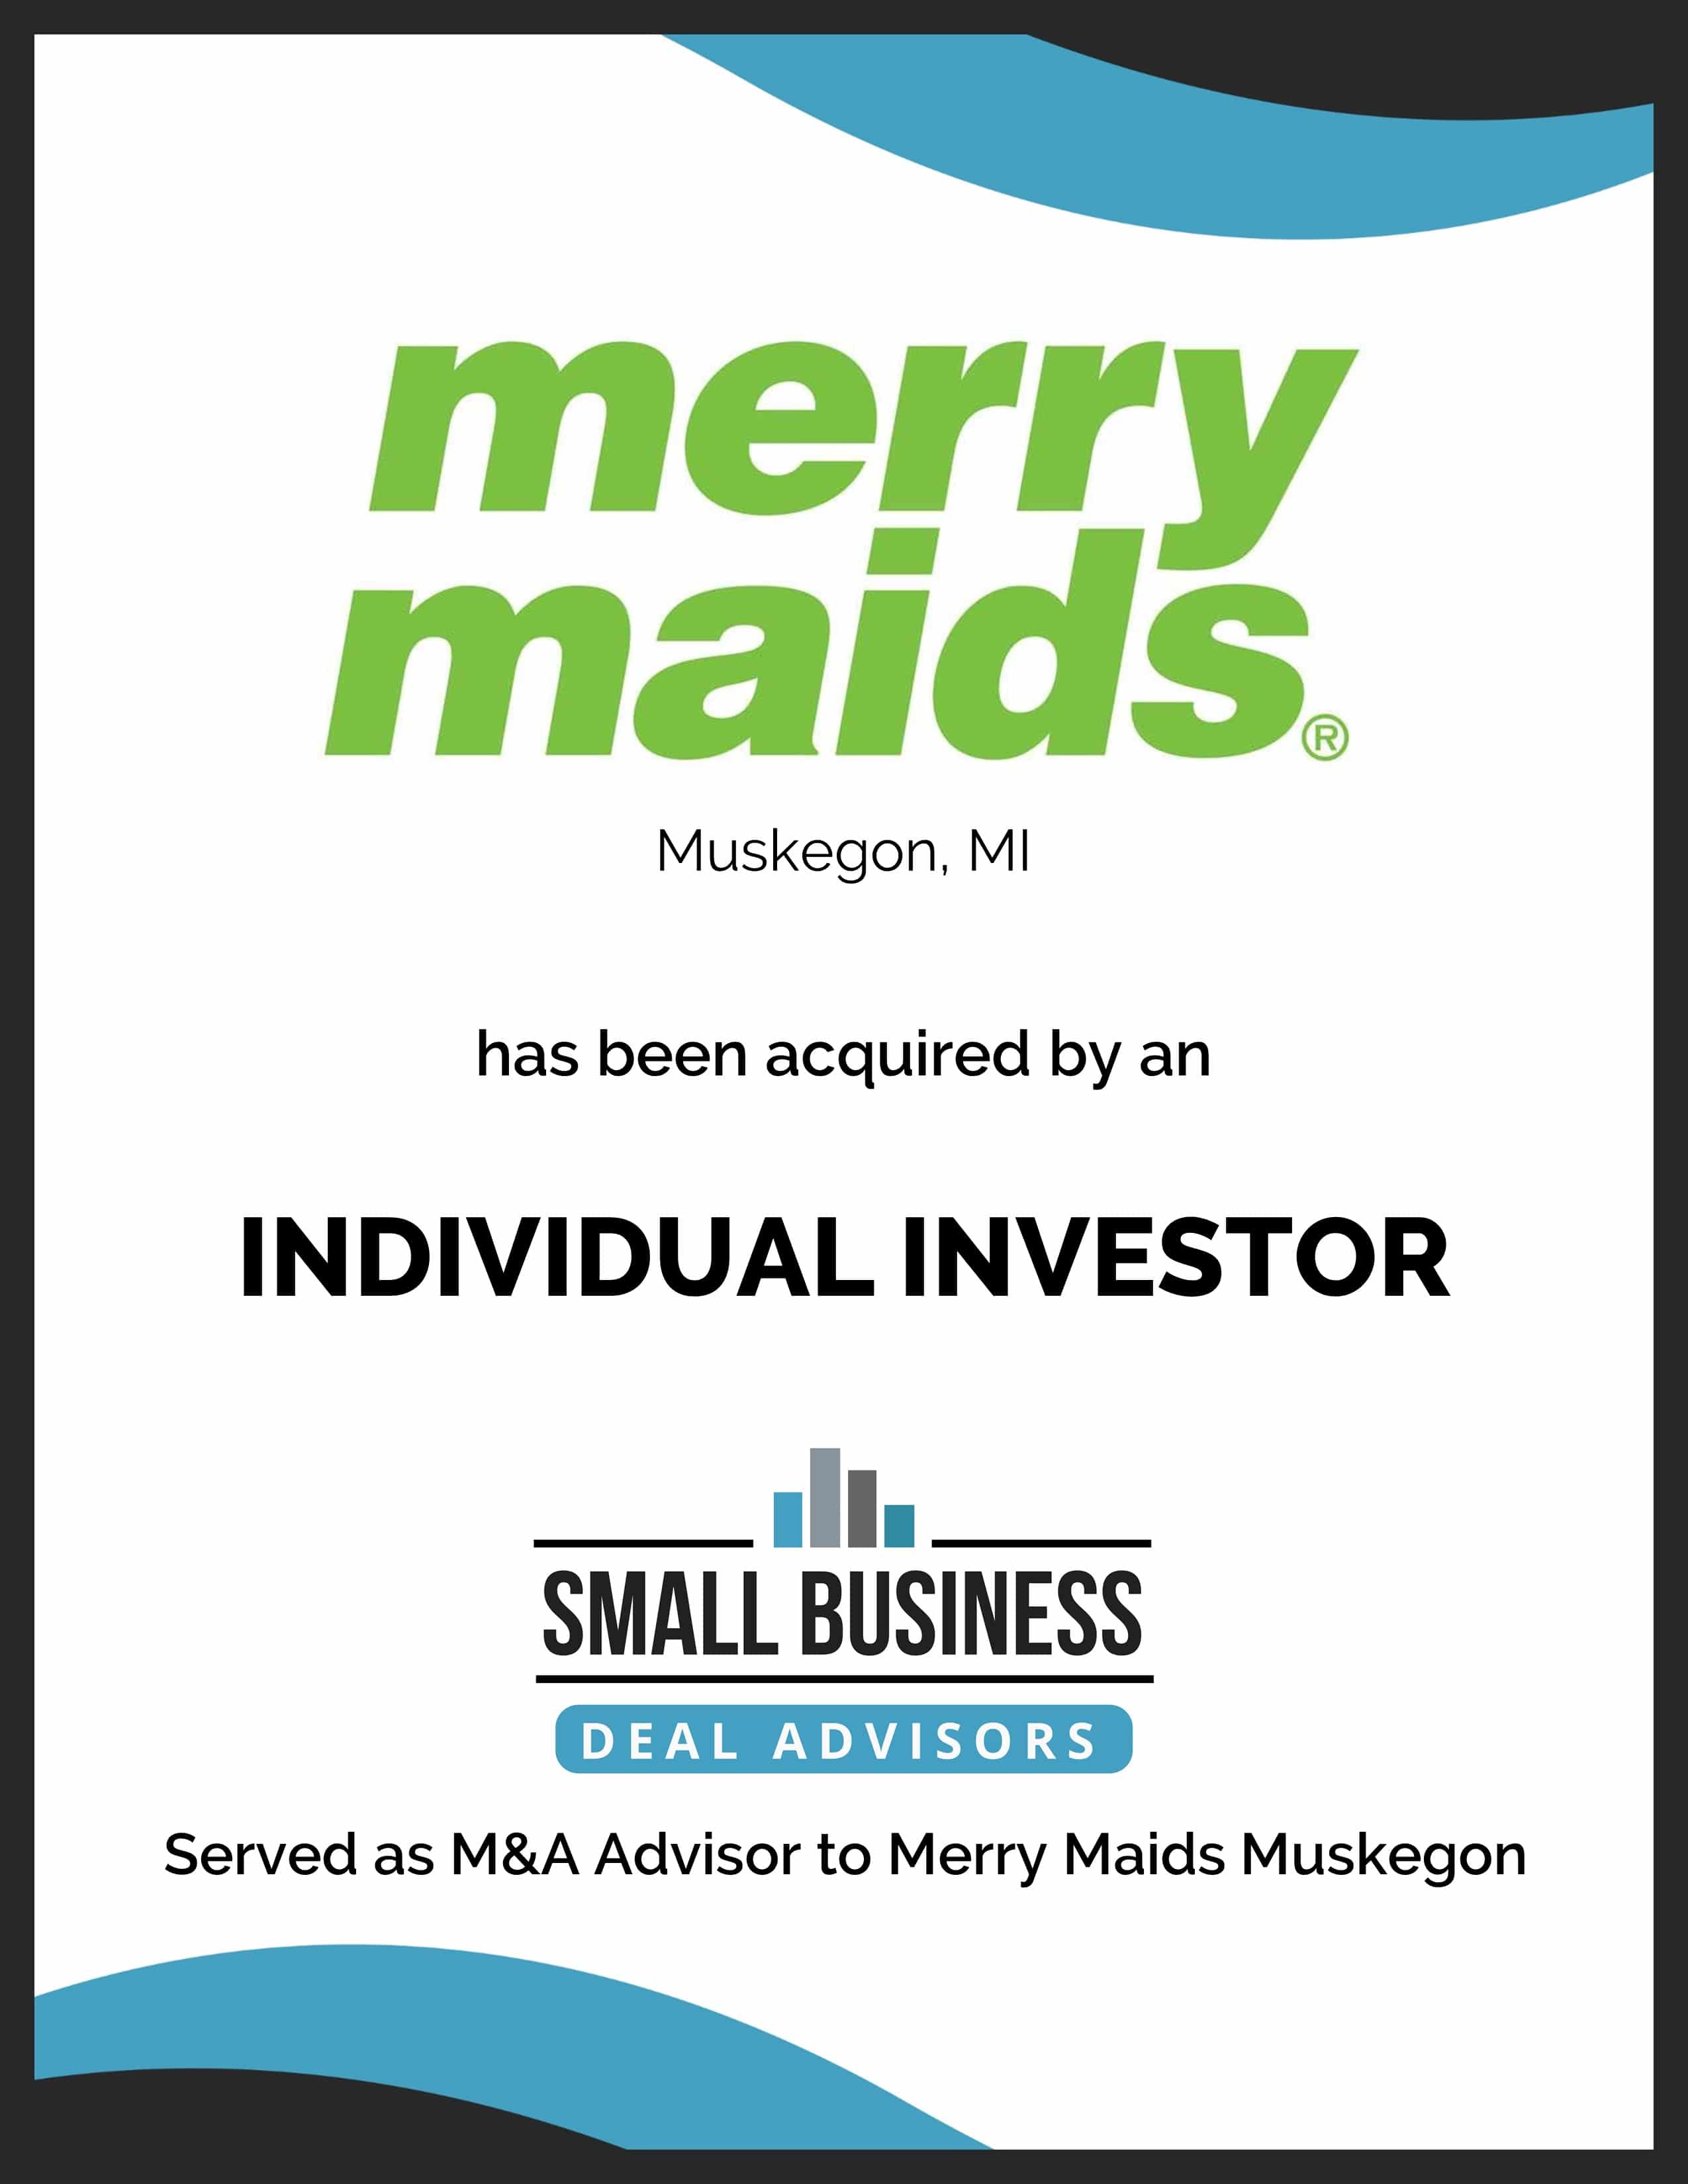 Merry Maids Muskegon Sold to an Individual Investor